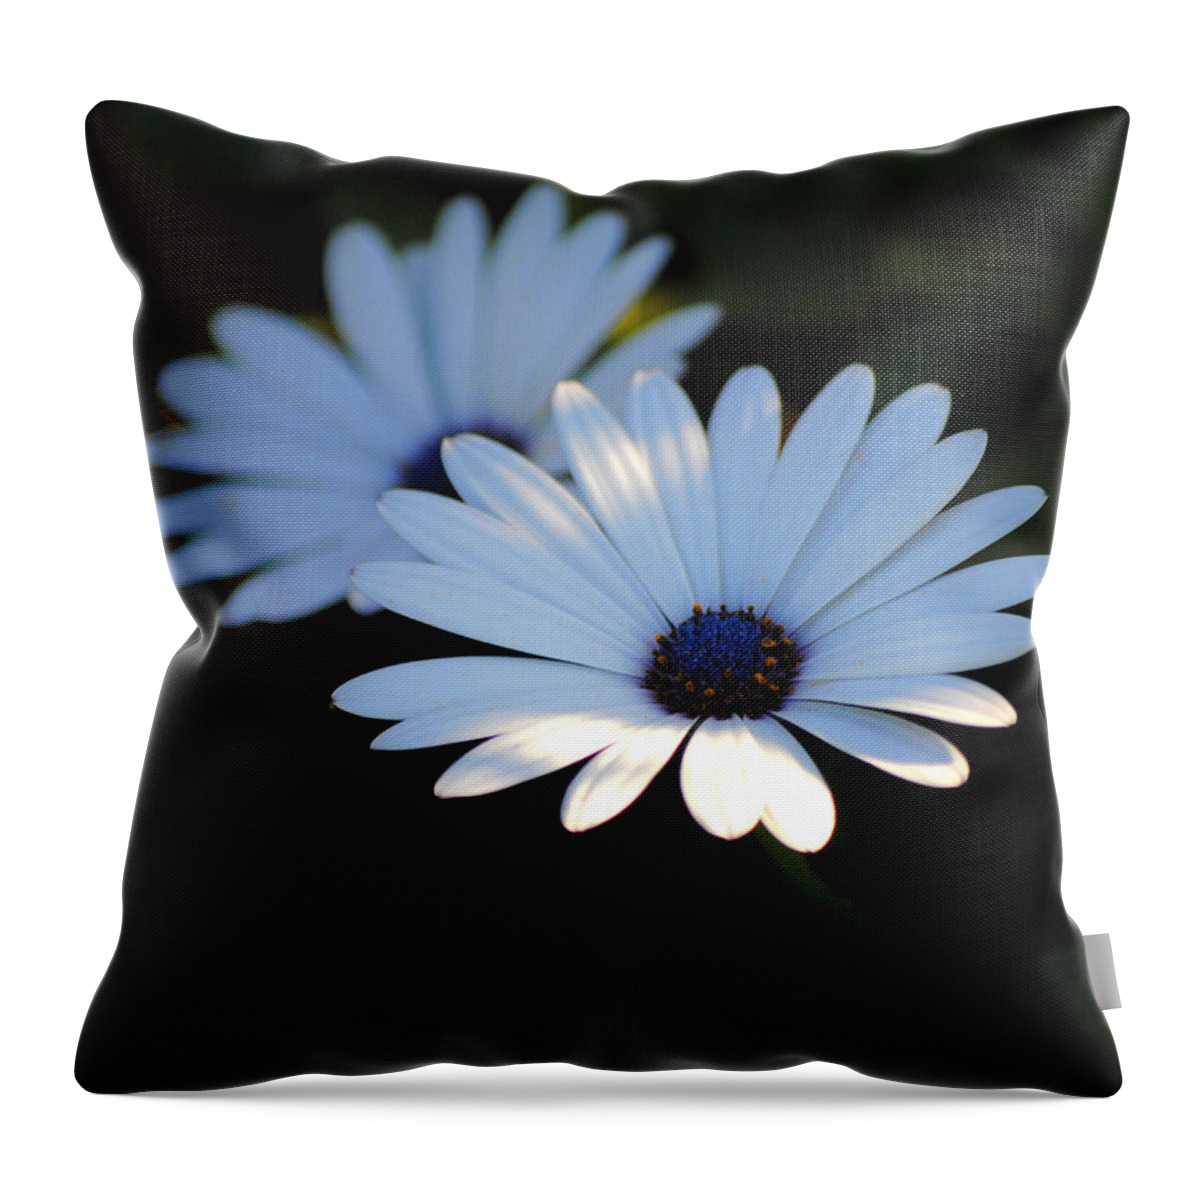 Blue Throw Pillow featuring the photograph Dramatic Daisies by Jai Johnson